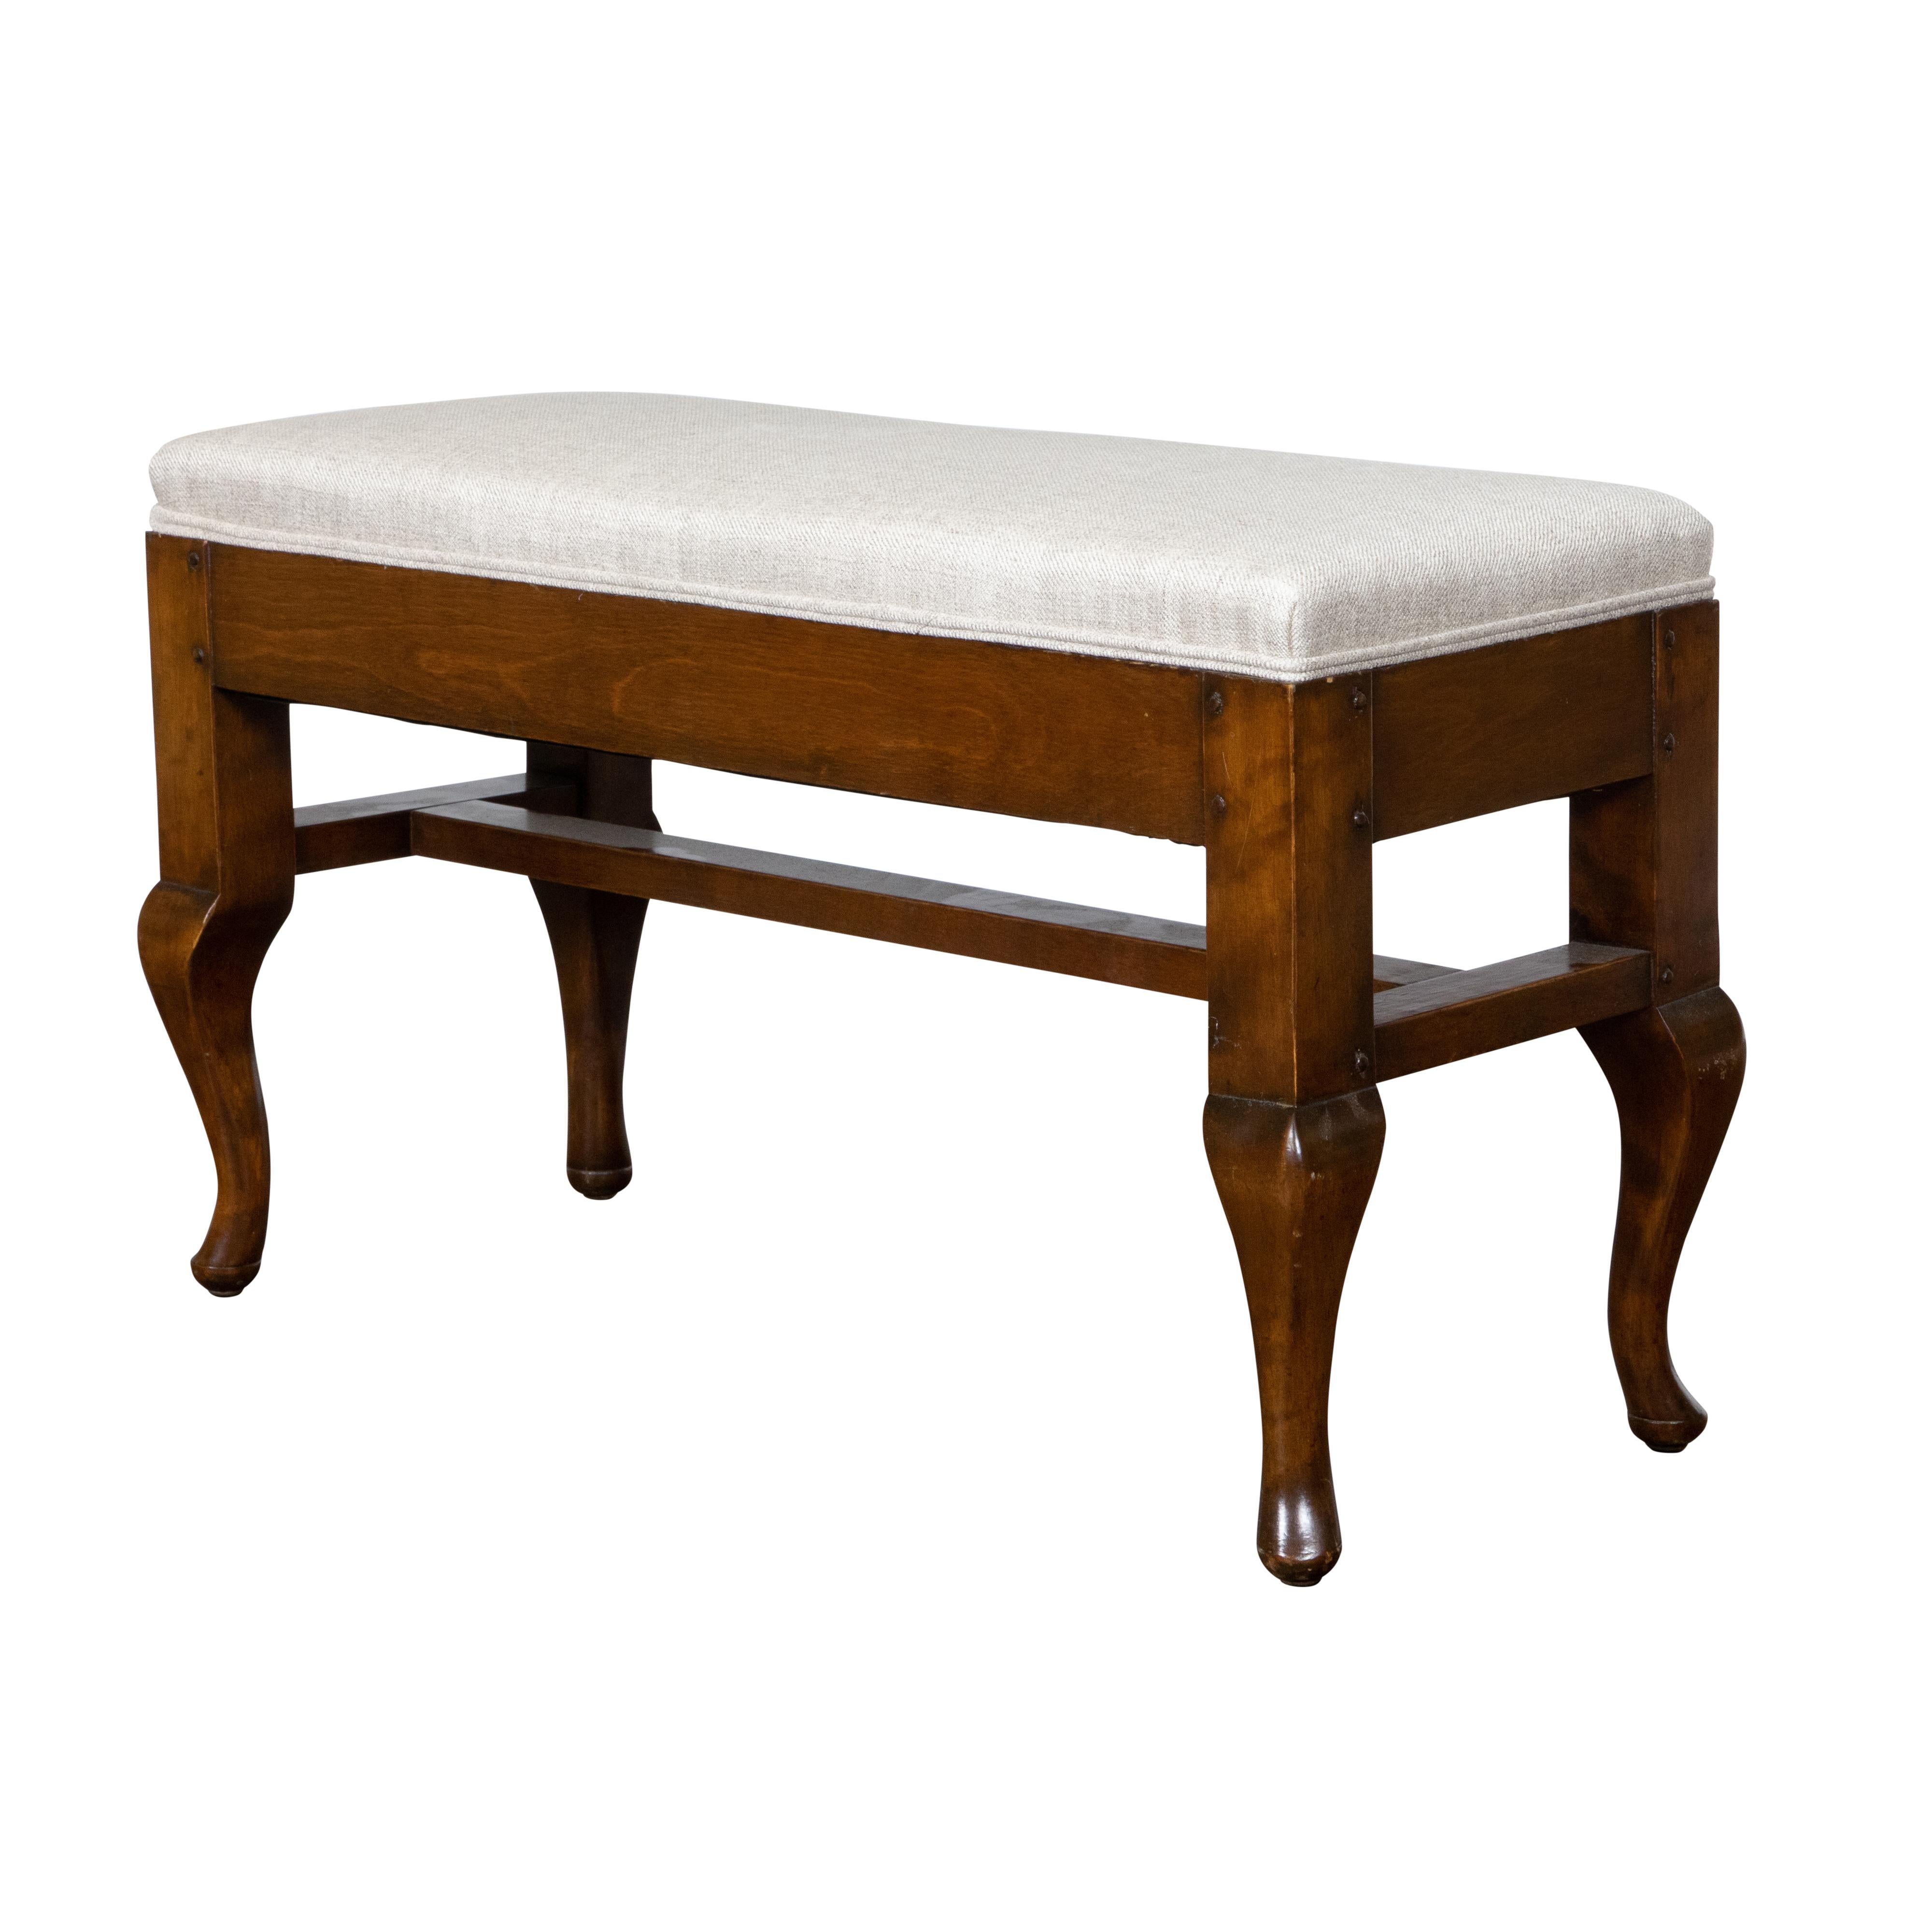 A small French wooden bench from the early 19th century, with curving legs, H-Form cross stretcher and new upholstery. Created in France during the early years of the 19th century, this wooden bench features a rectangular top newly and